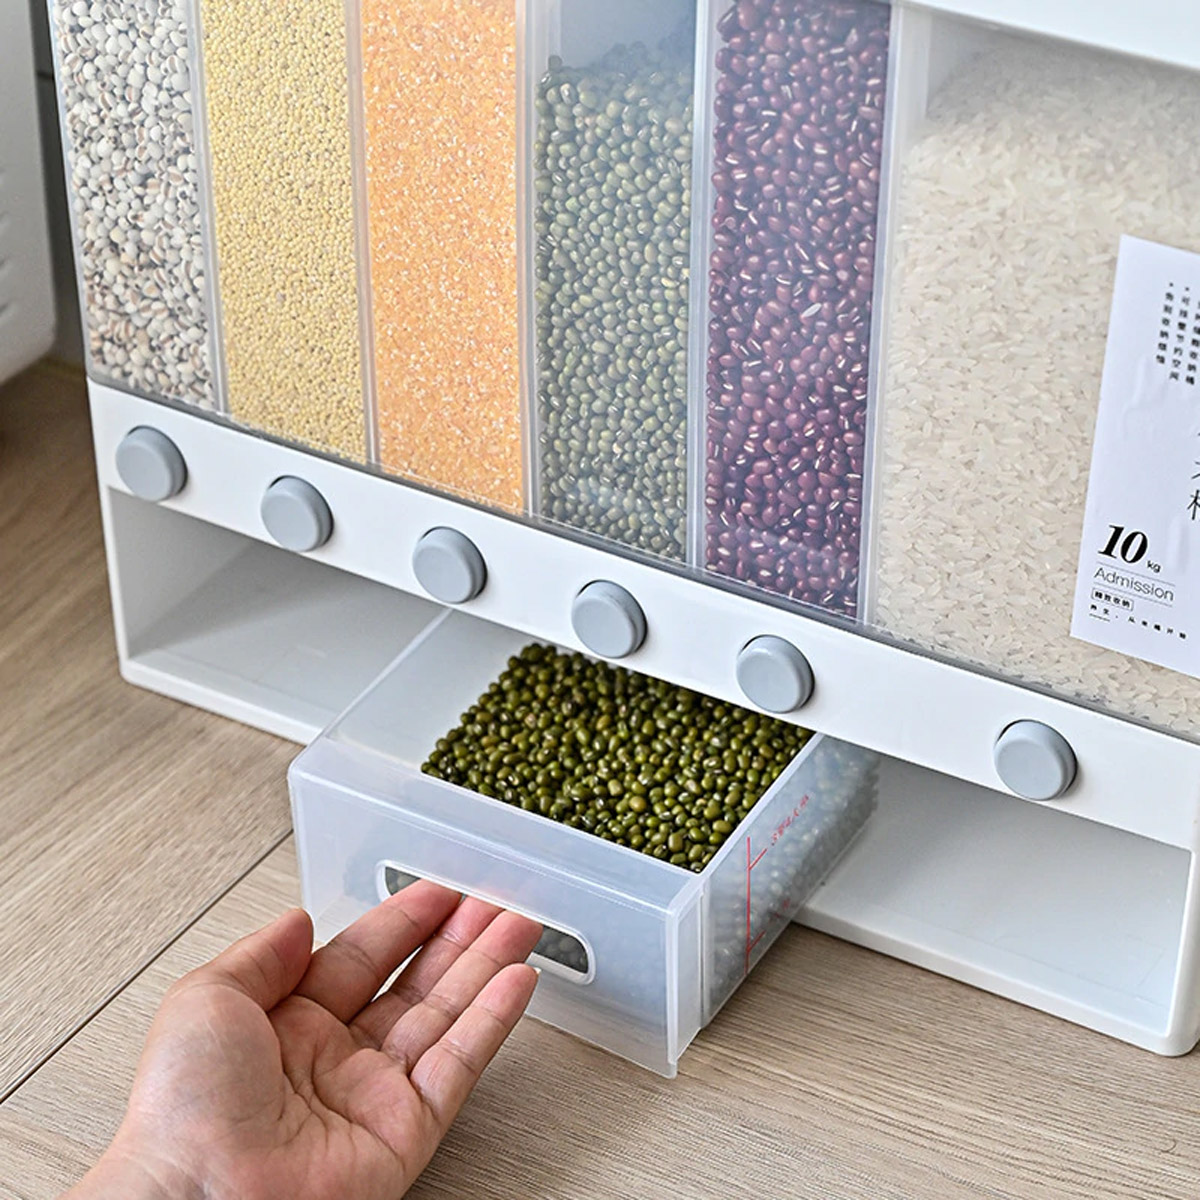 Transparent wall mounted food dispenser filled with multi-colored pulses and rice with a transparent bowl filled with green pulses